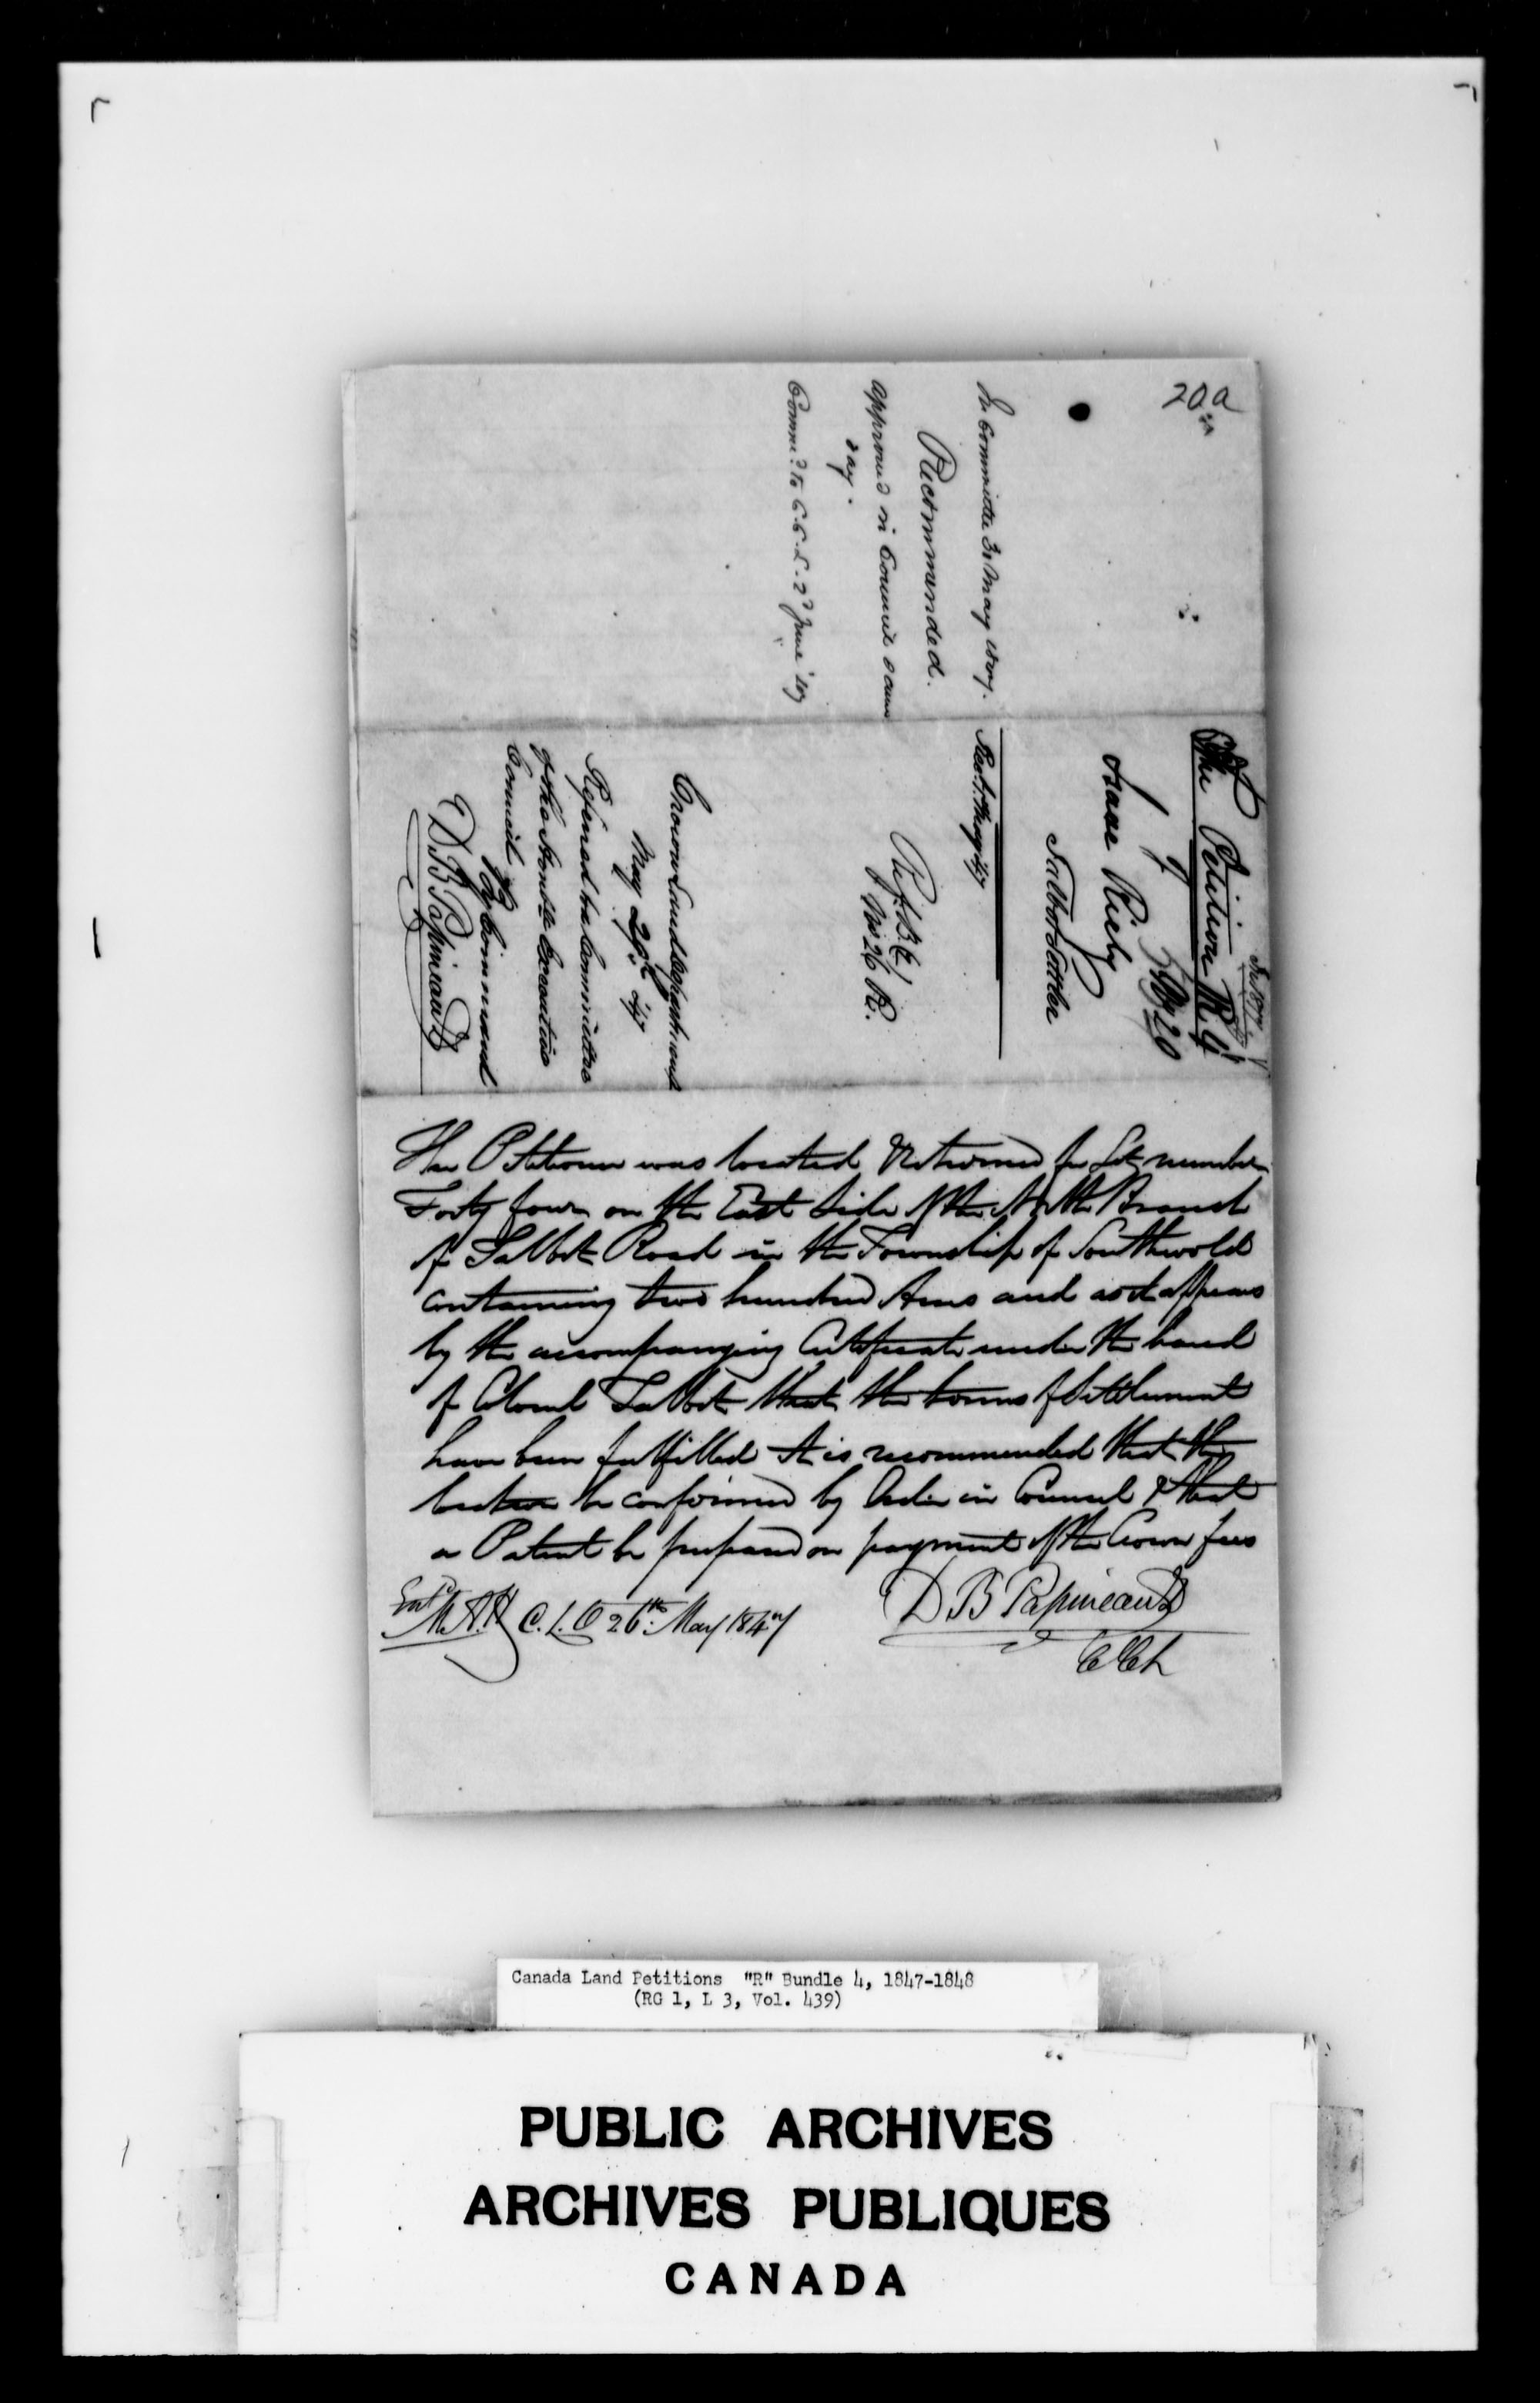 Title: Upper Canada Land Petitions (1763-1865) - Mikan Number: 205131 - Microform: c-2750